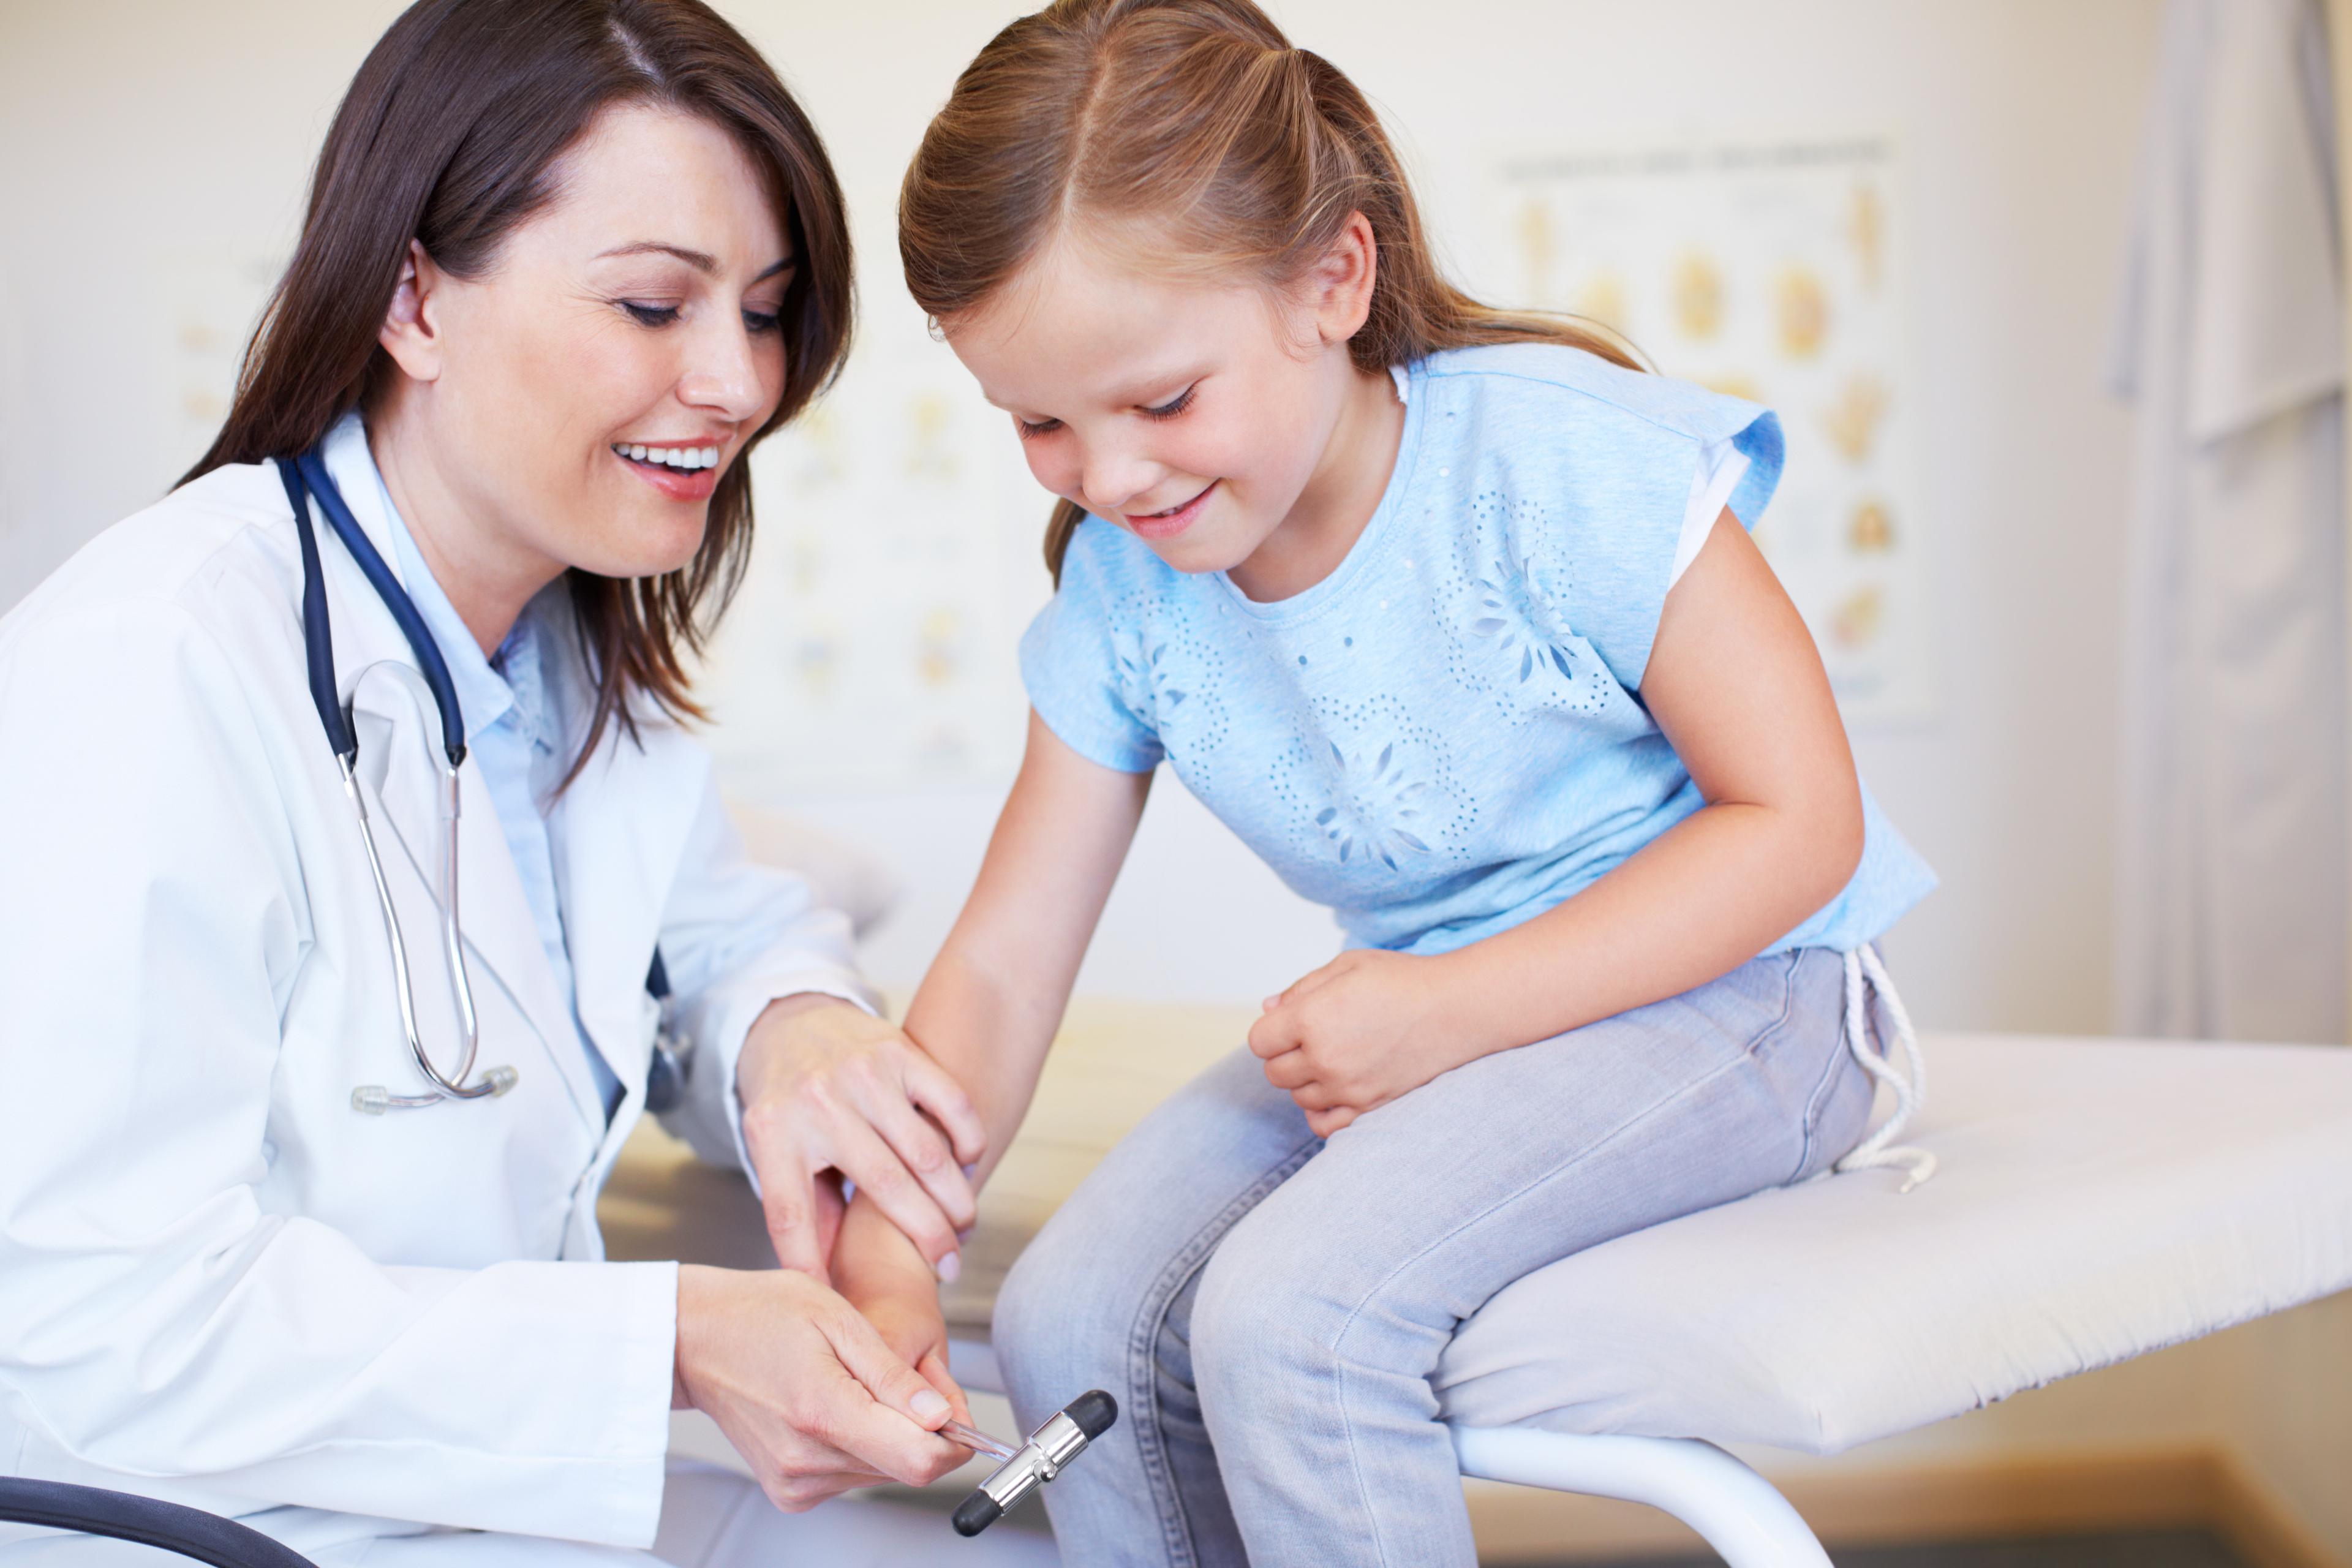 Family Nurse Practitioner vs. Doctor- a picture of an FNP testing a young patient's knee reflex